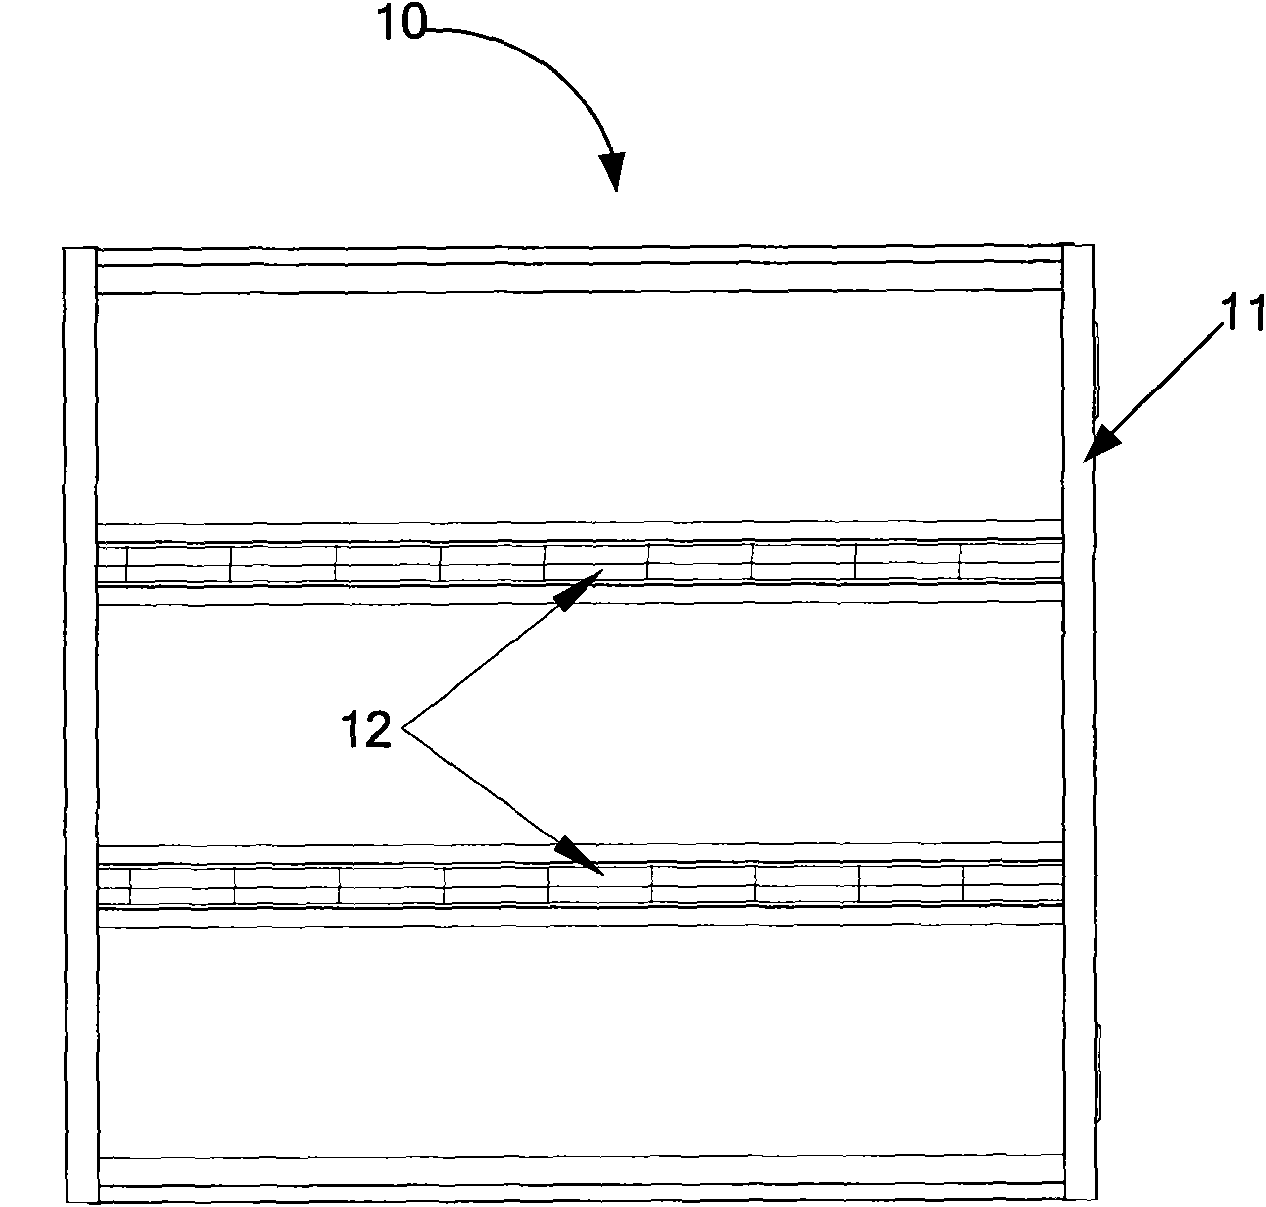 Elevator ceiling and method for mounting same